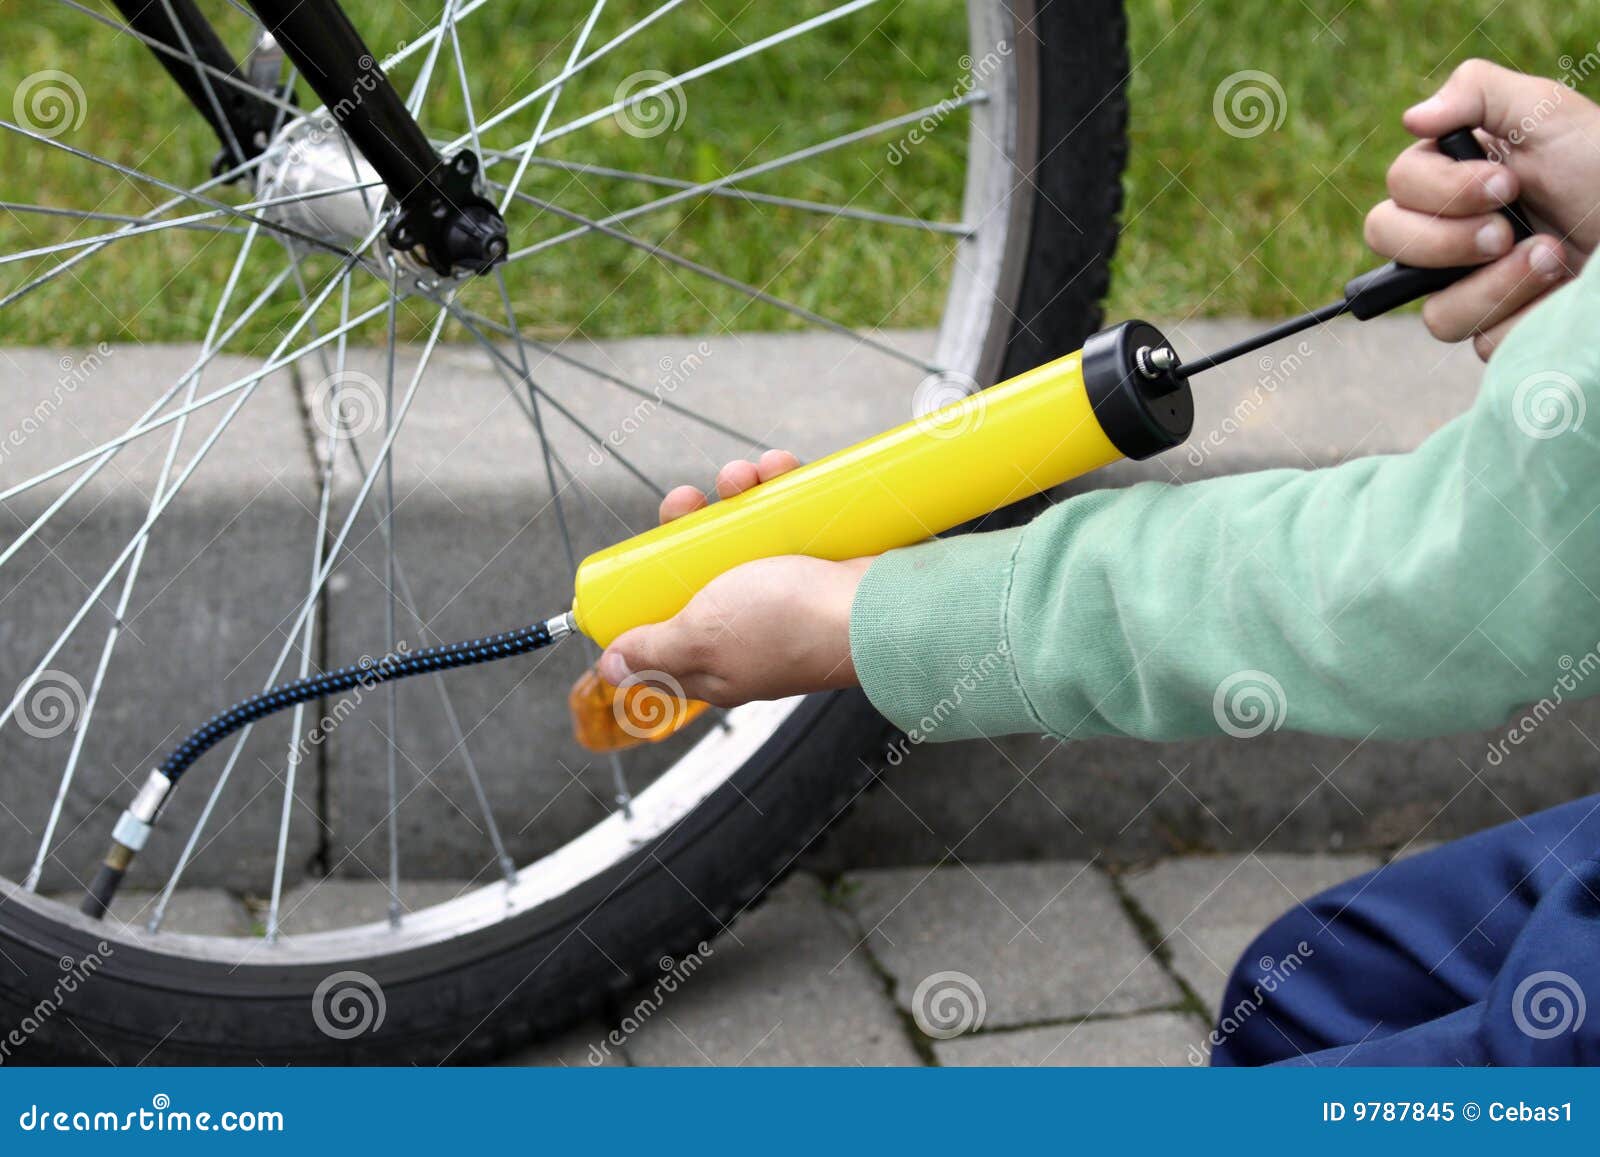 pumping bicycle tire